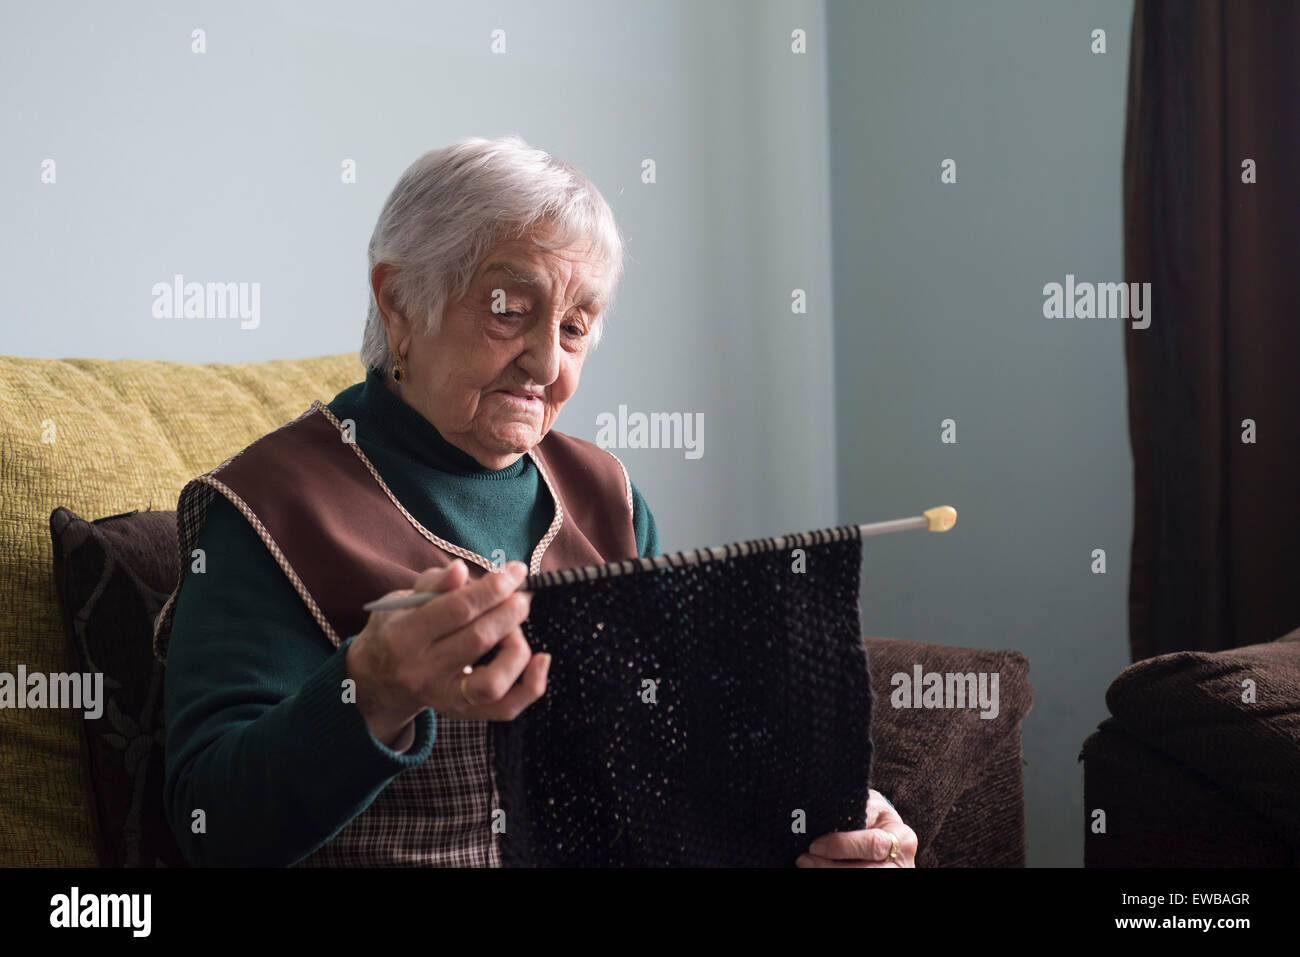 Elderly woman knitting at home. Woman is focus in her activity. Stock Photo